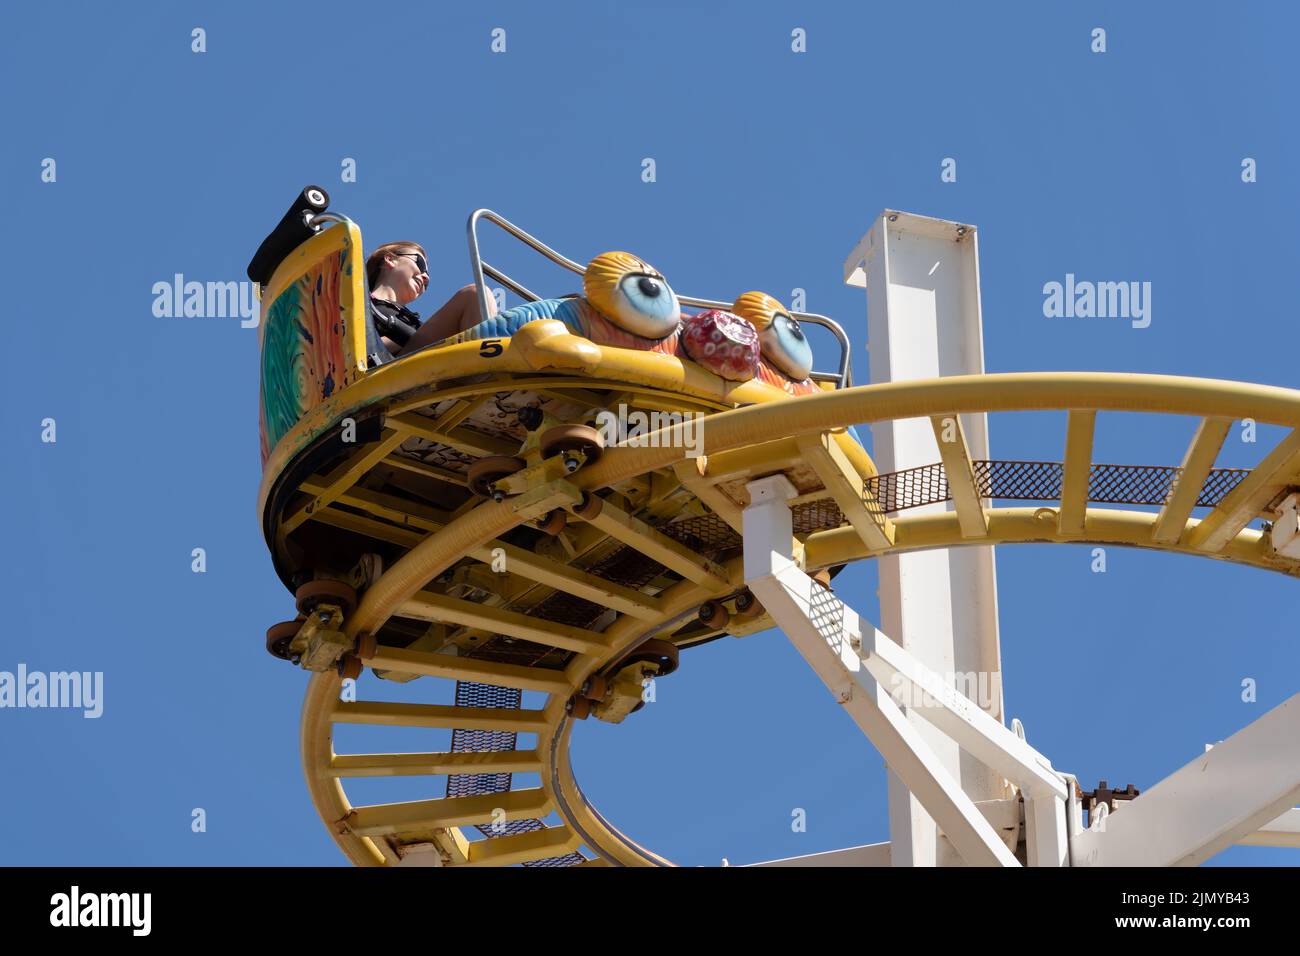 Brighton, East Sussex, UK - July 15, 2022 : View of the scenic railway ride on the pier  in Brighton on July 15, 2022. One unide Stock Photo